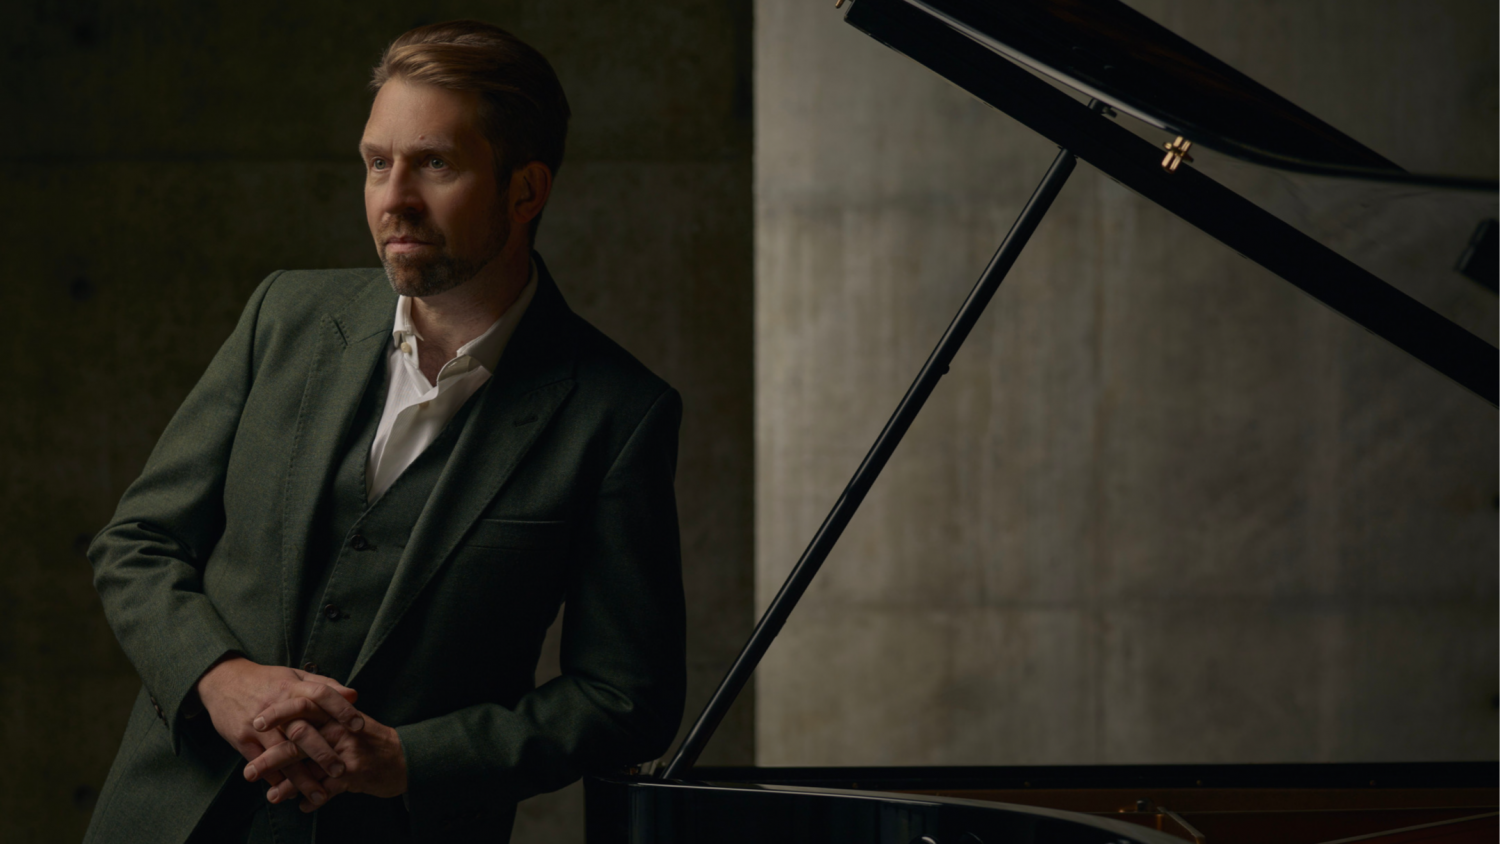 Musician Leif Ove Andsnes leaning on a piano